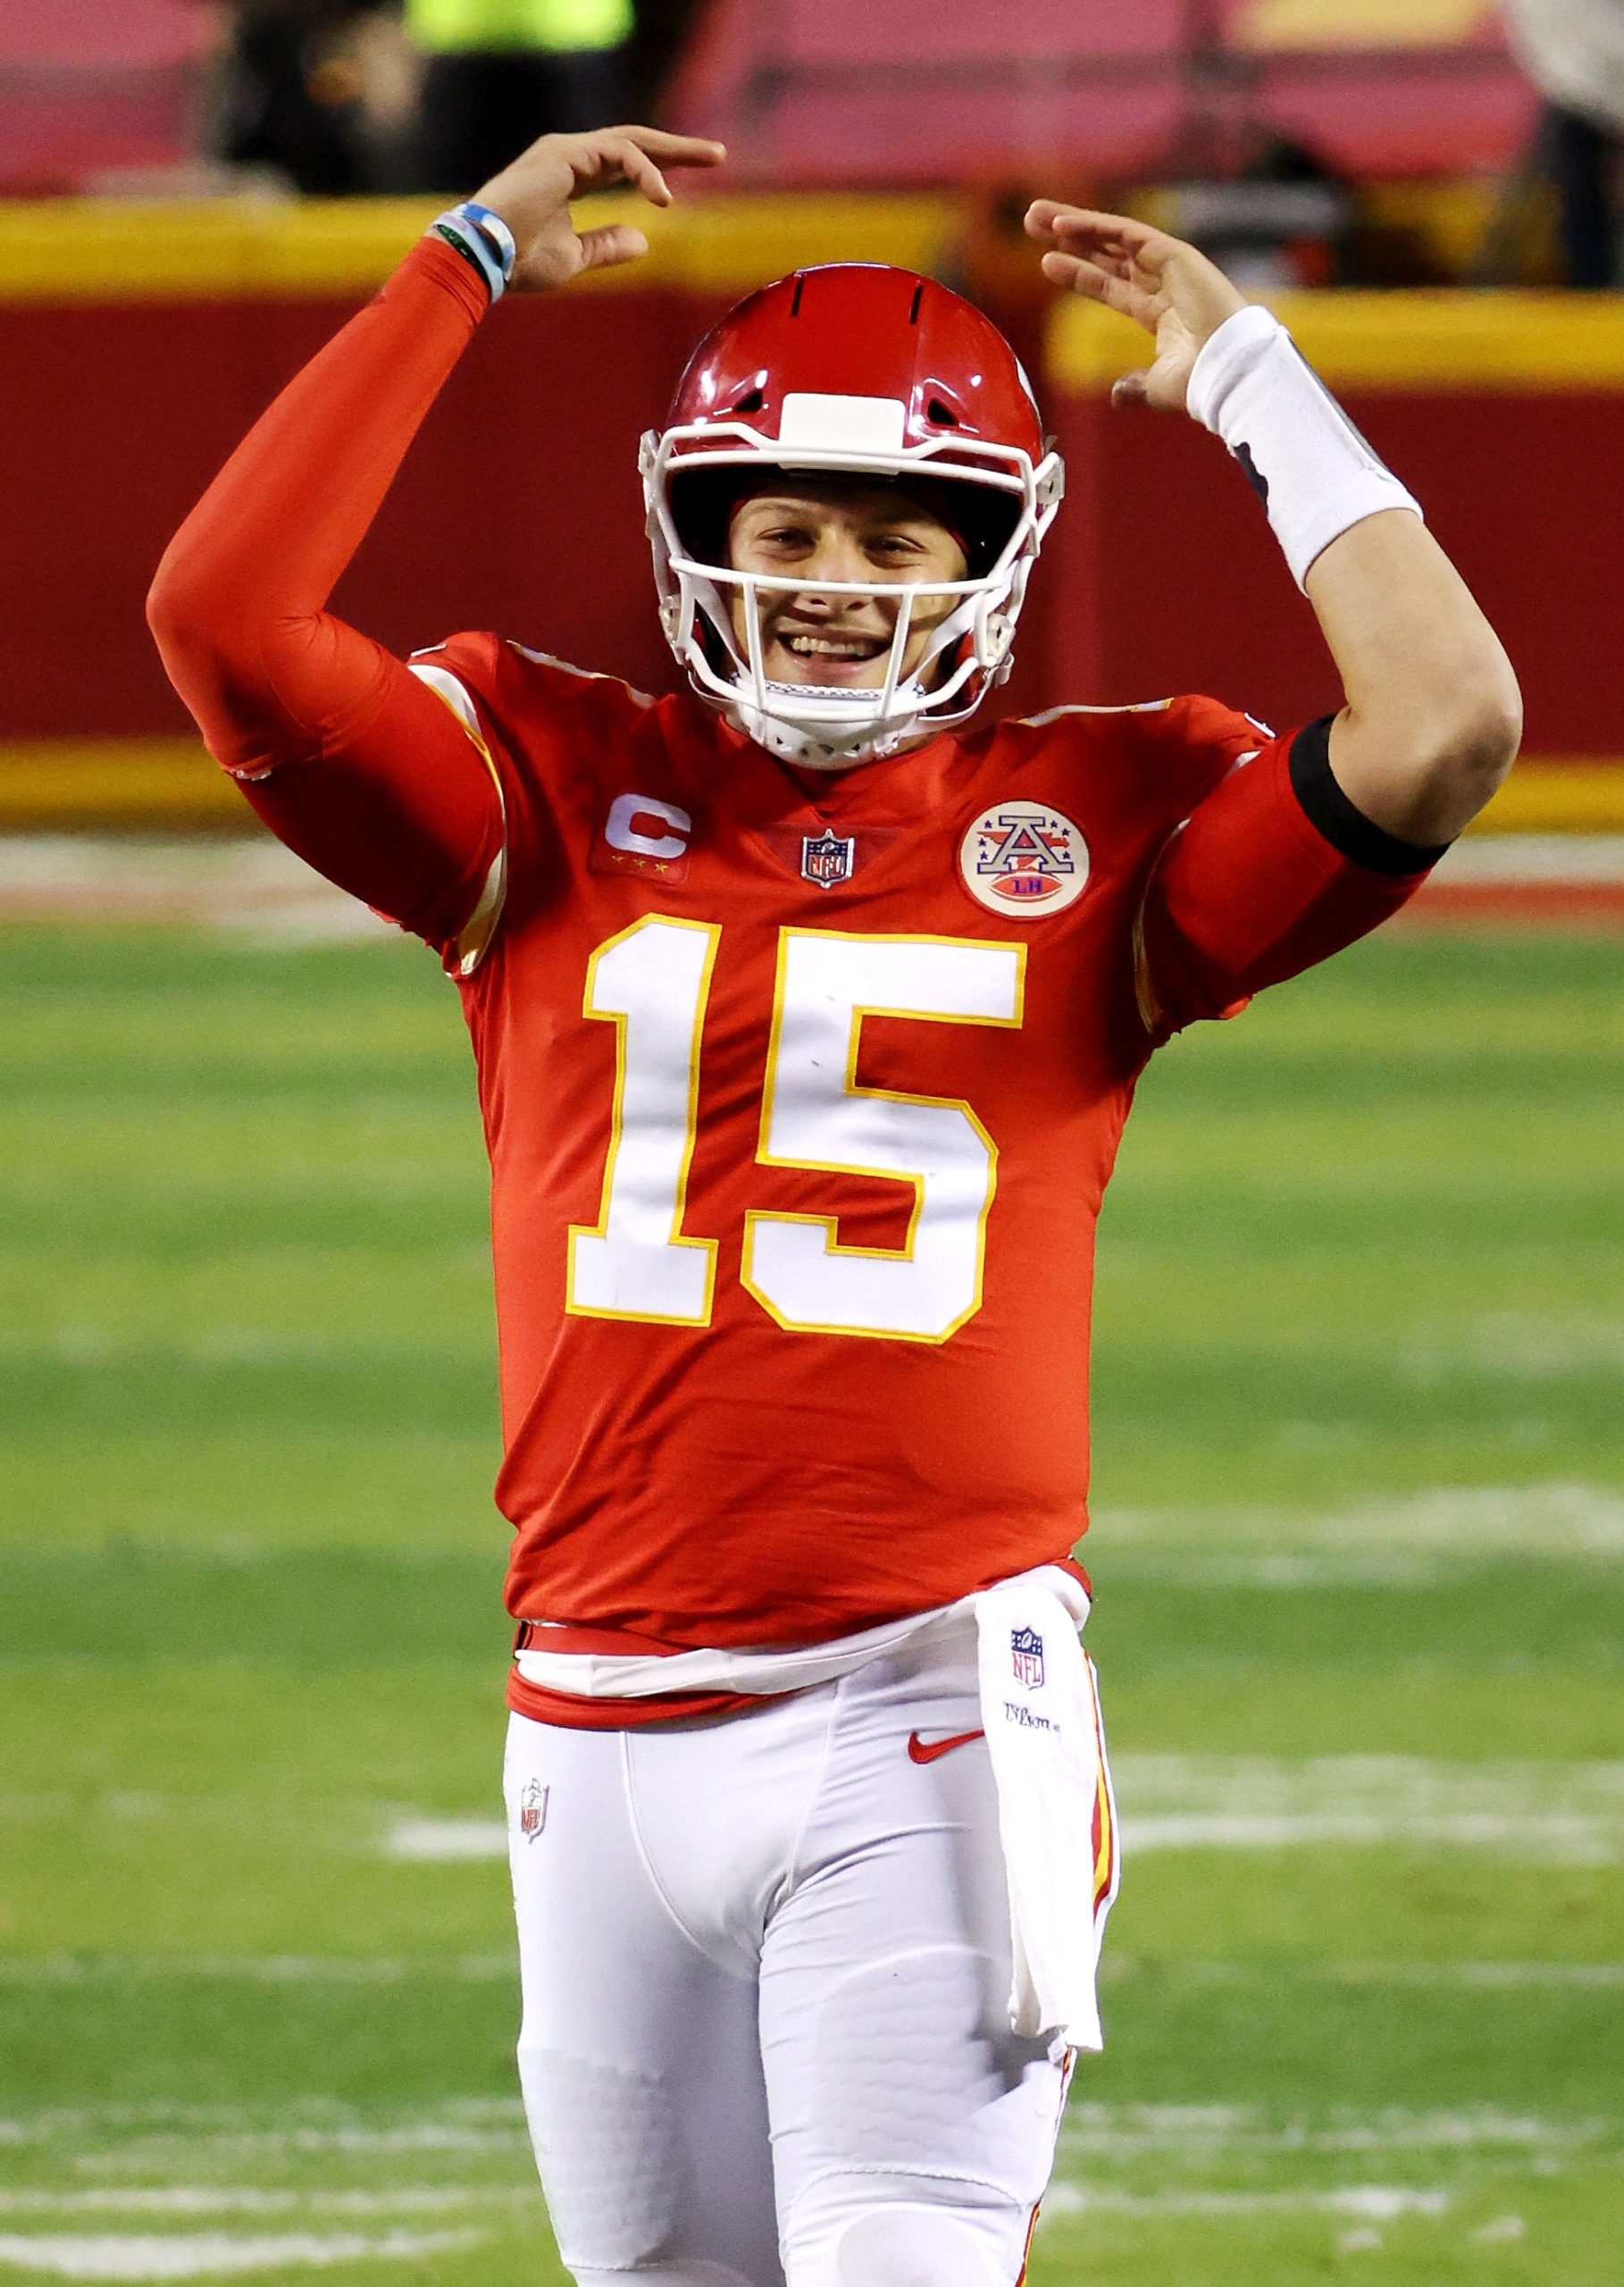 Mahomes is trying to win his second Super Bowl in Tampa Sunday night